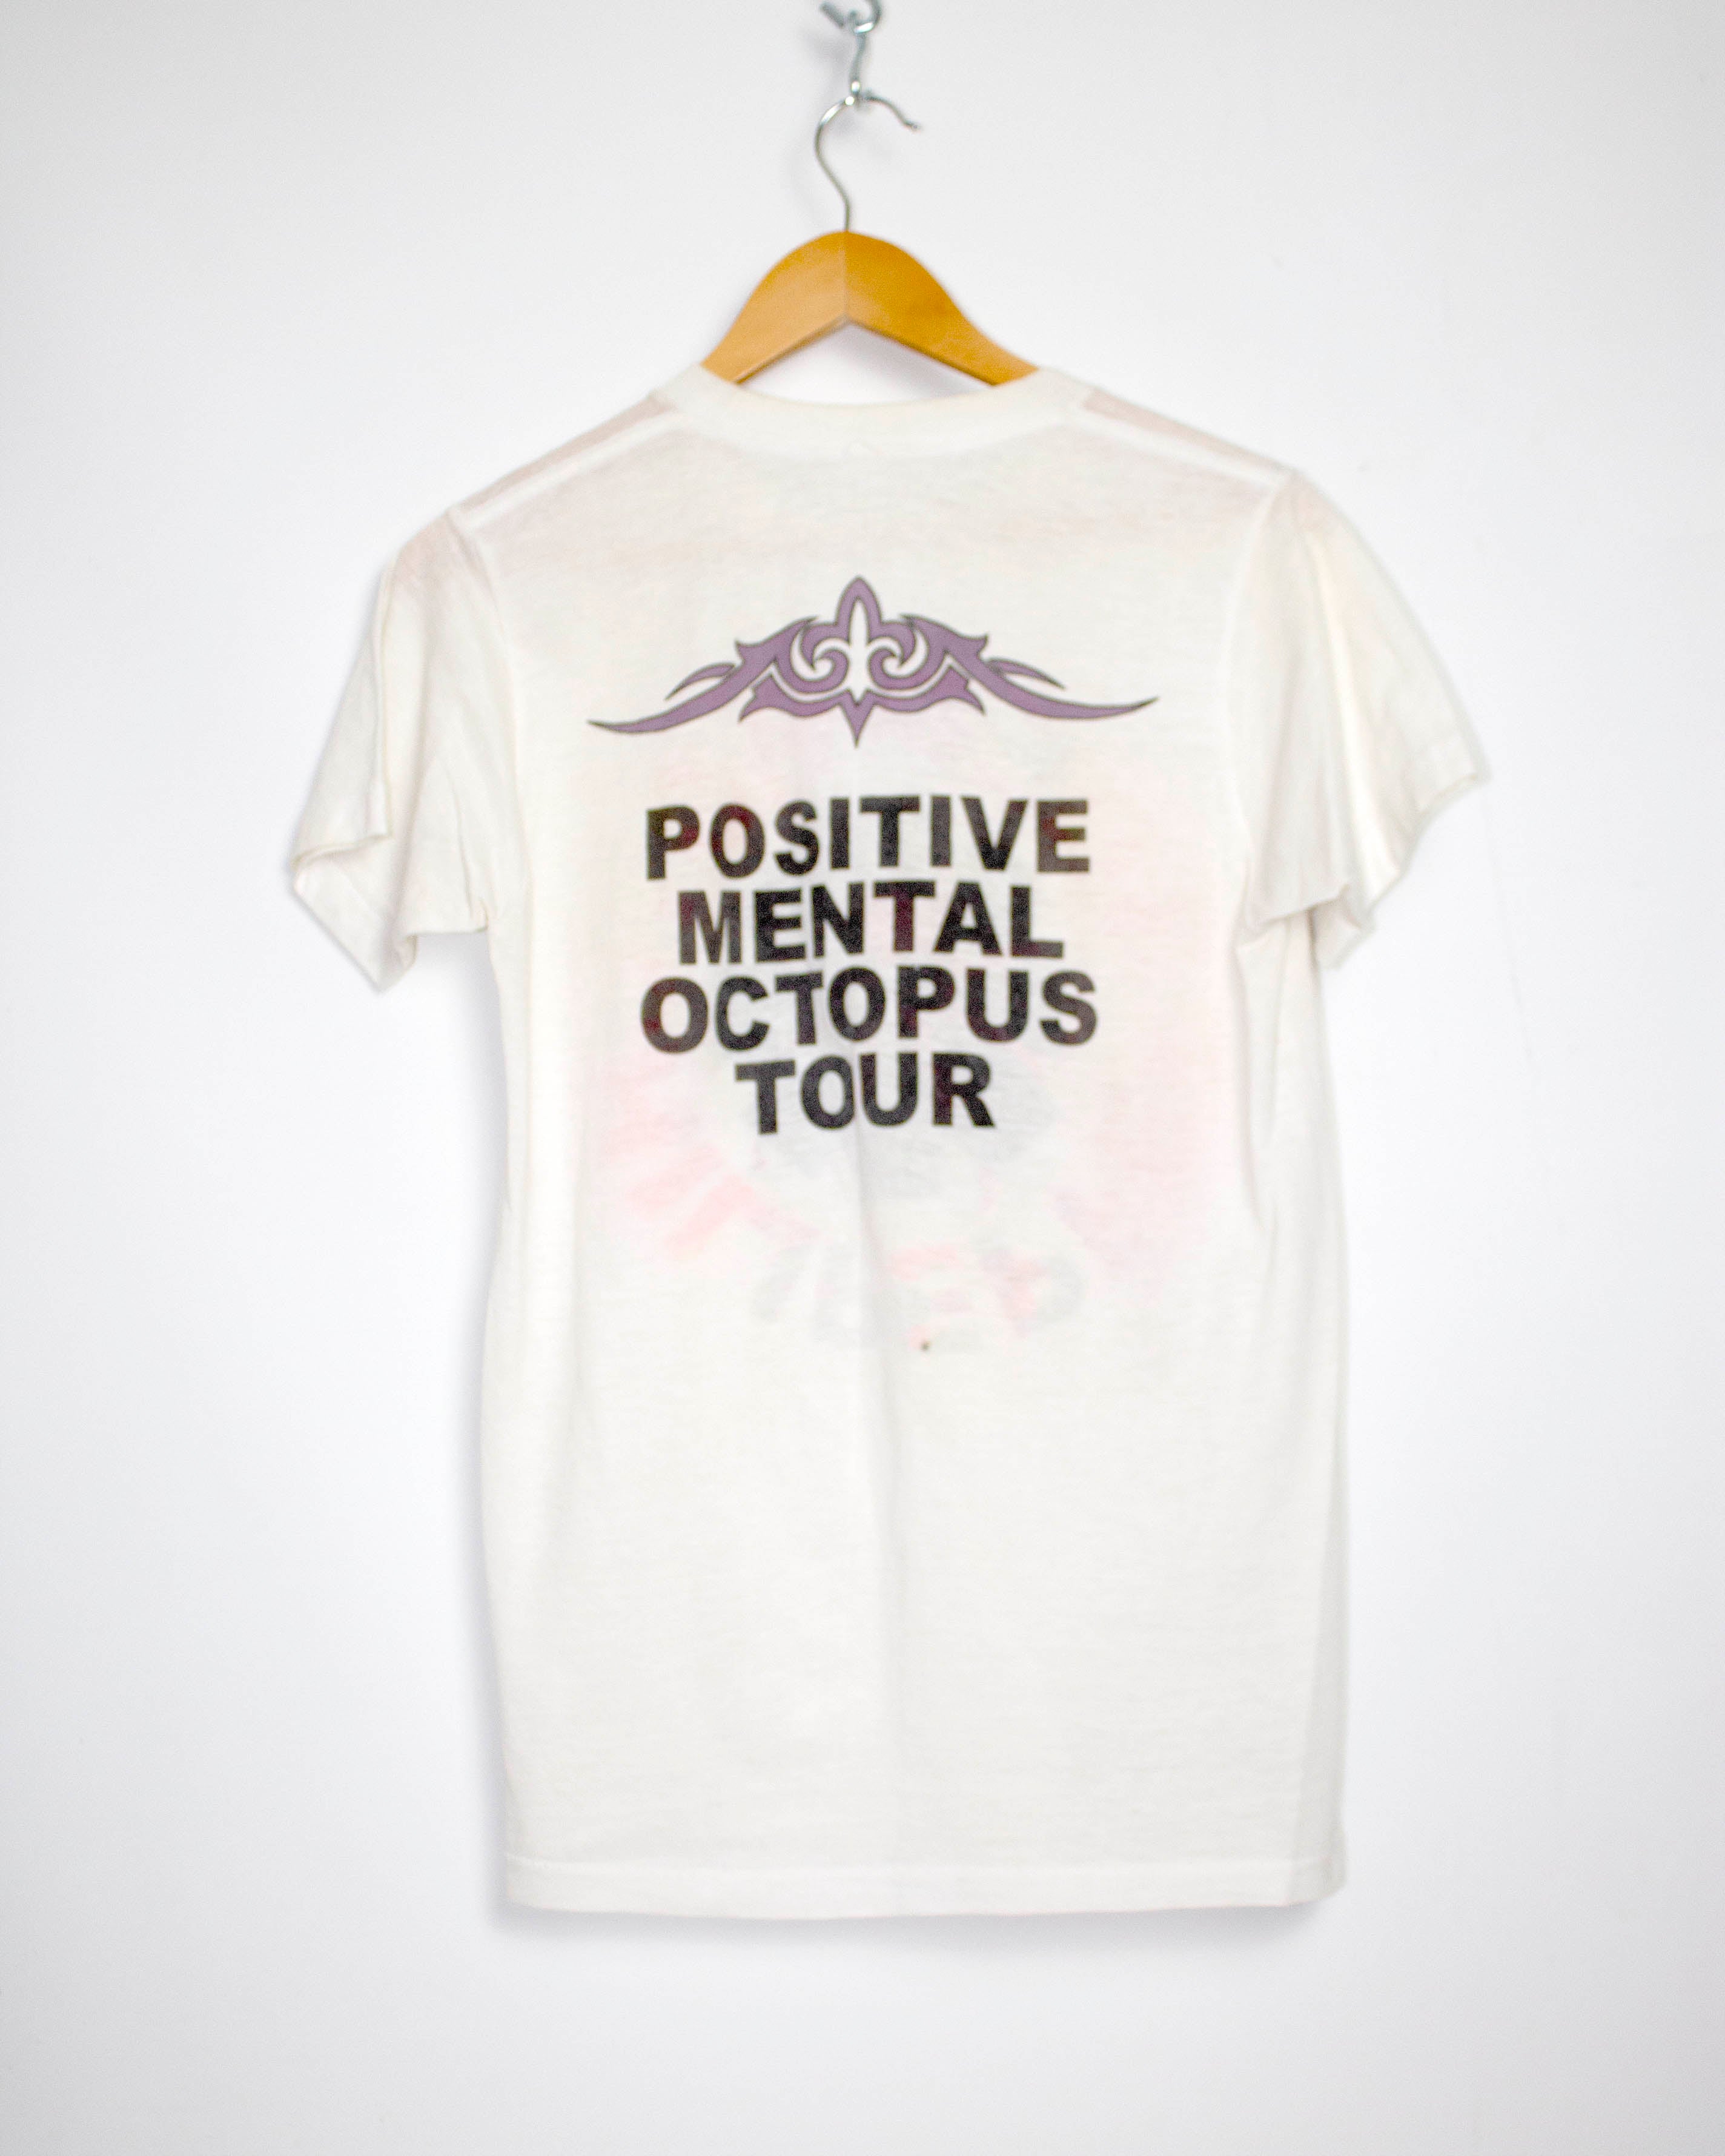 Vintage 1990 Red Hot Chili Peppers Positive Mental Octopus Tour T-Shirt Sz